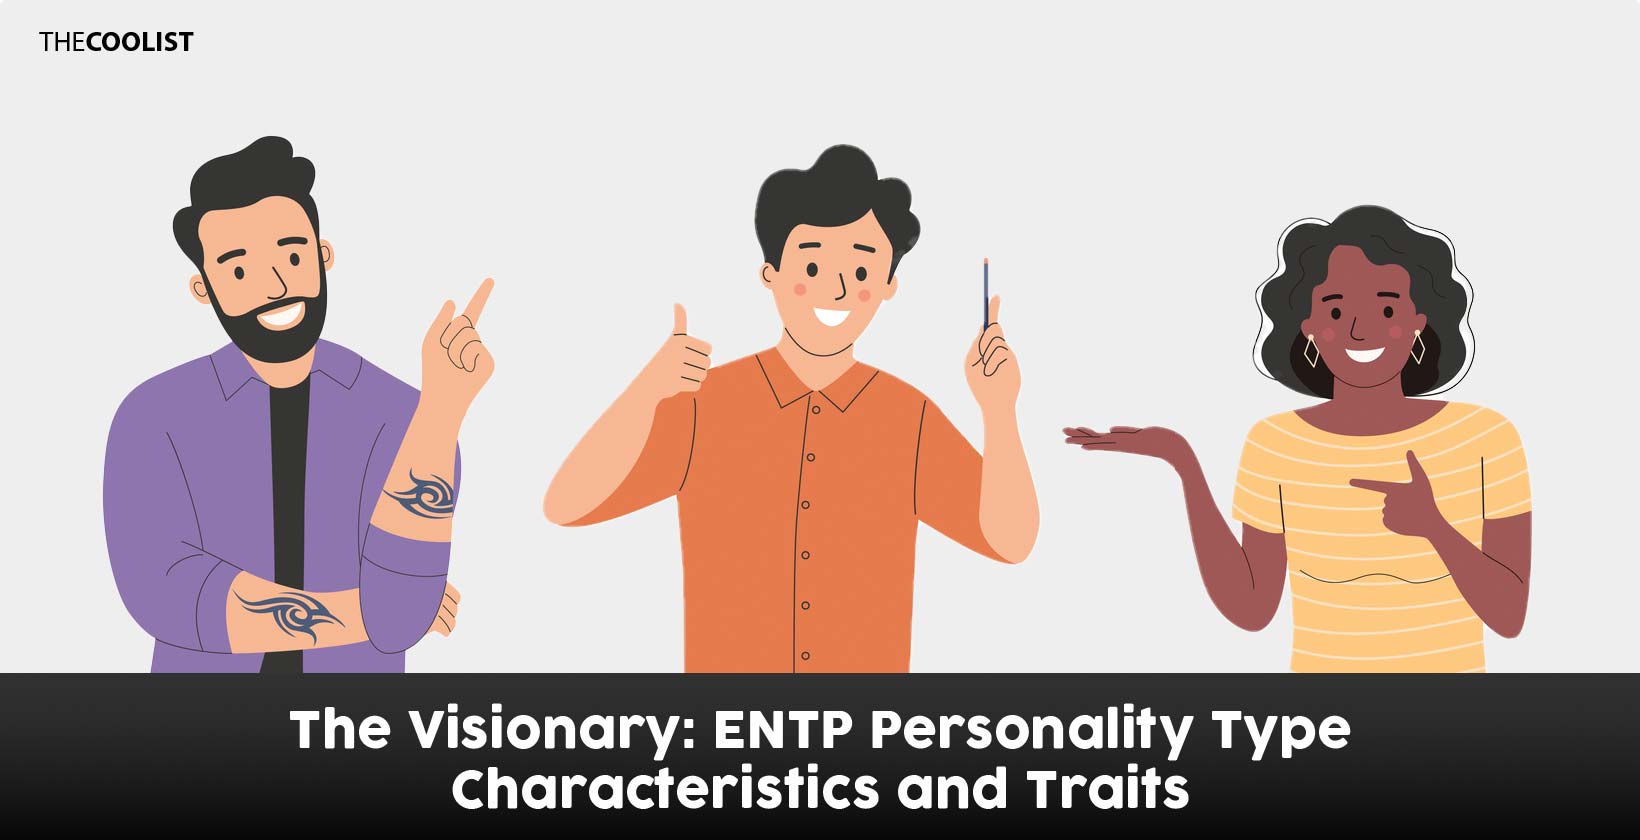 ENTP personality type